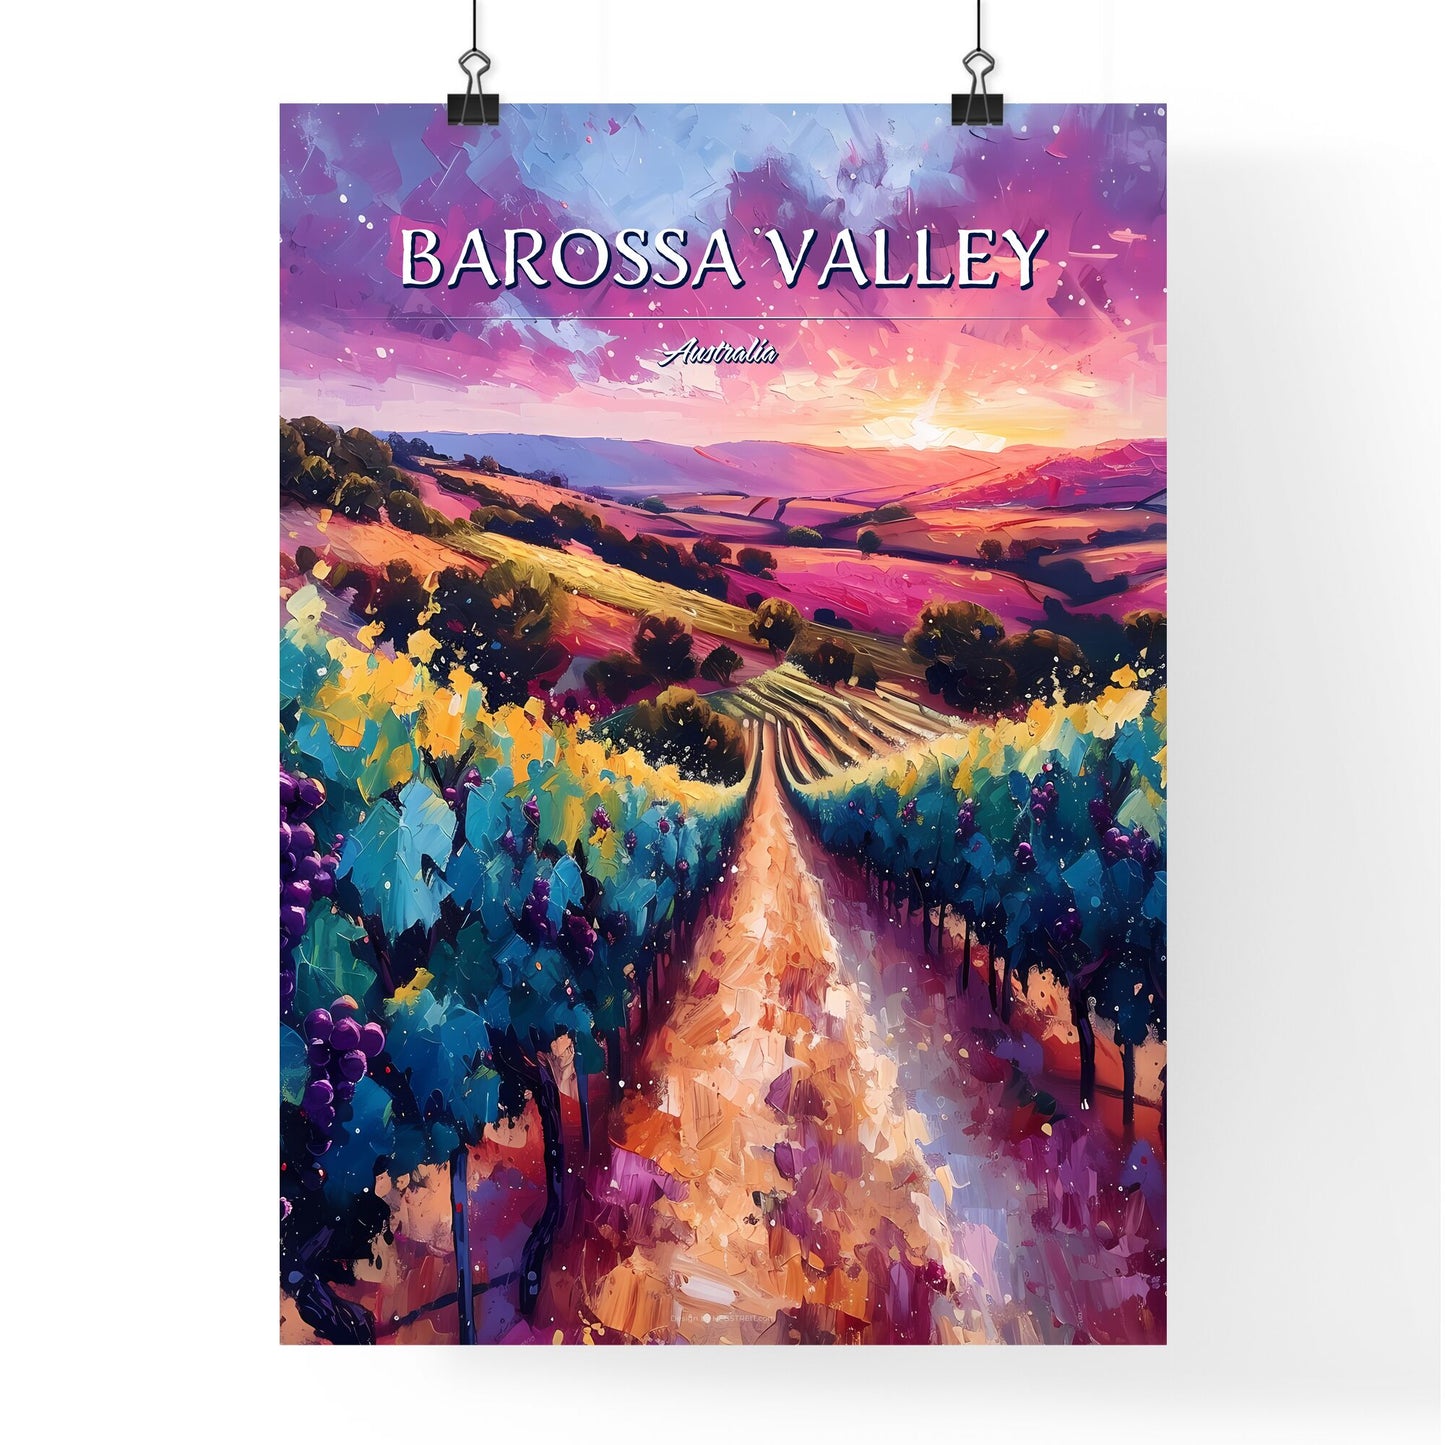 Barossa Valley, Australia - Art print of a painting of a vineyard Default Title